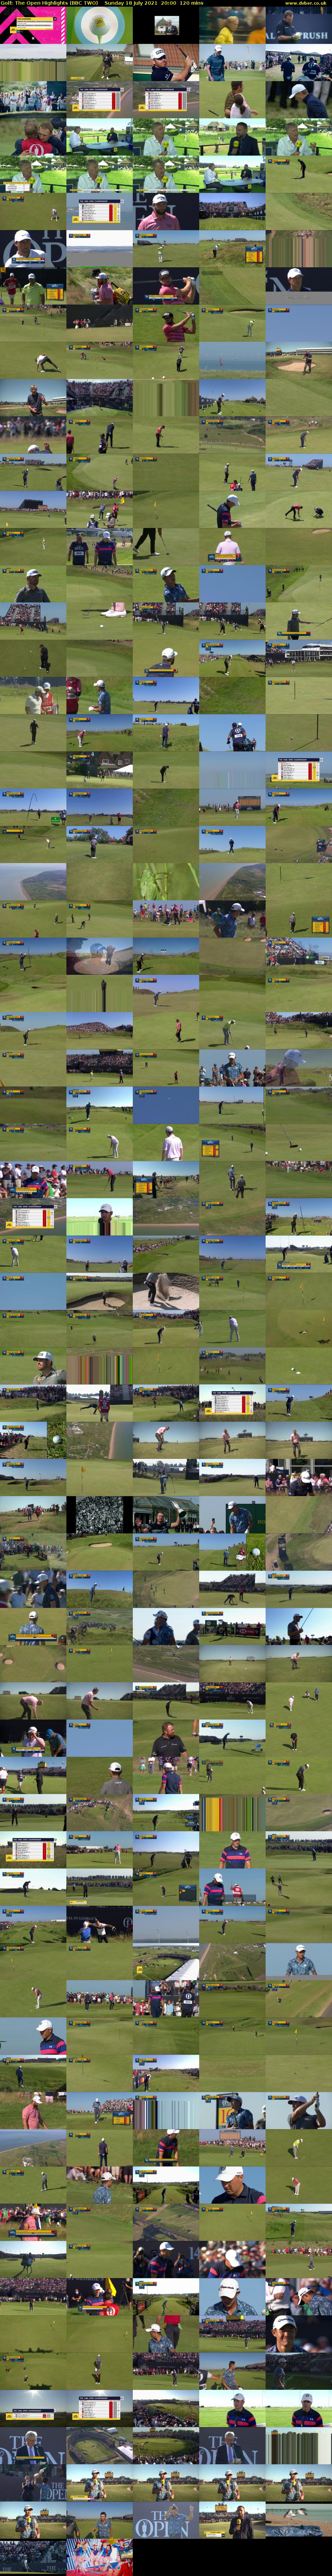 Golf: The Open Highlights (BBC TWO) Sunday 18 July 2021 20:00 - 22:00